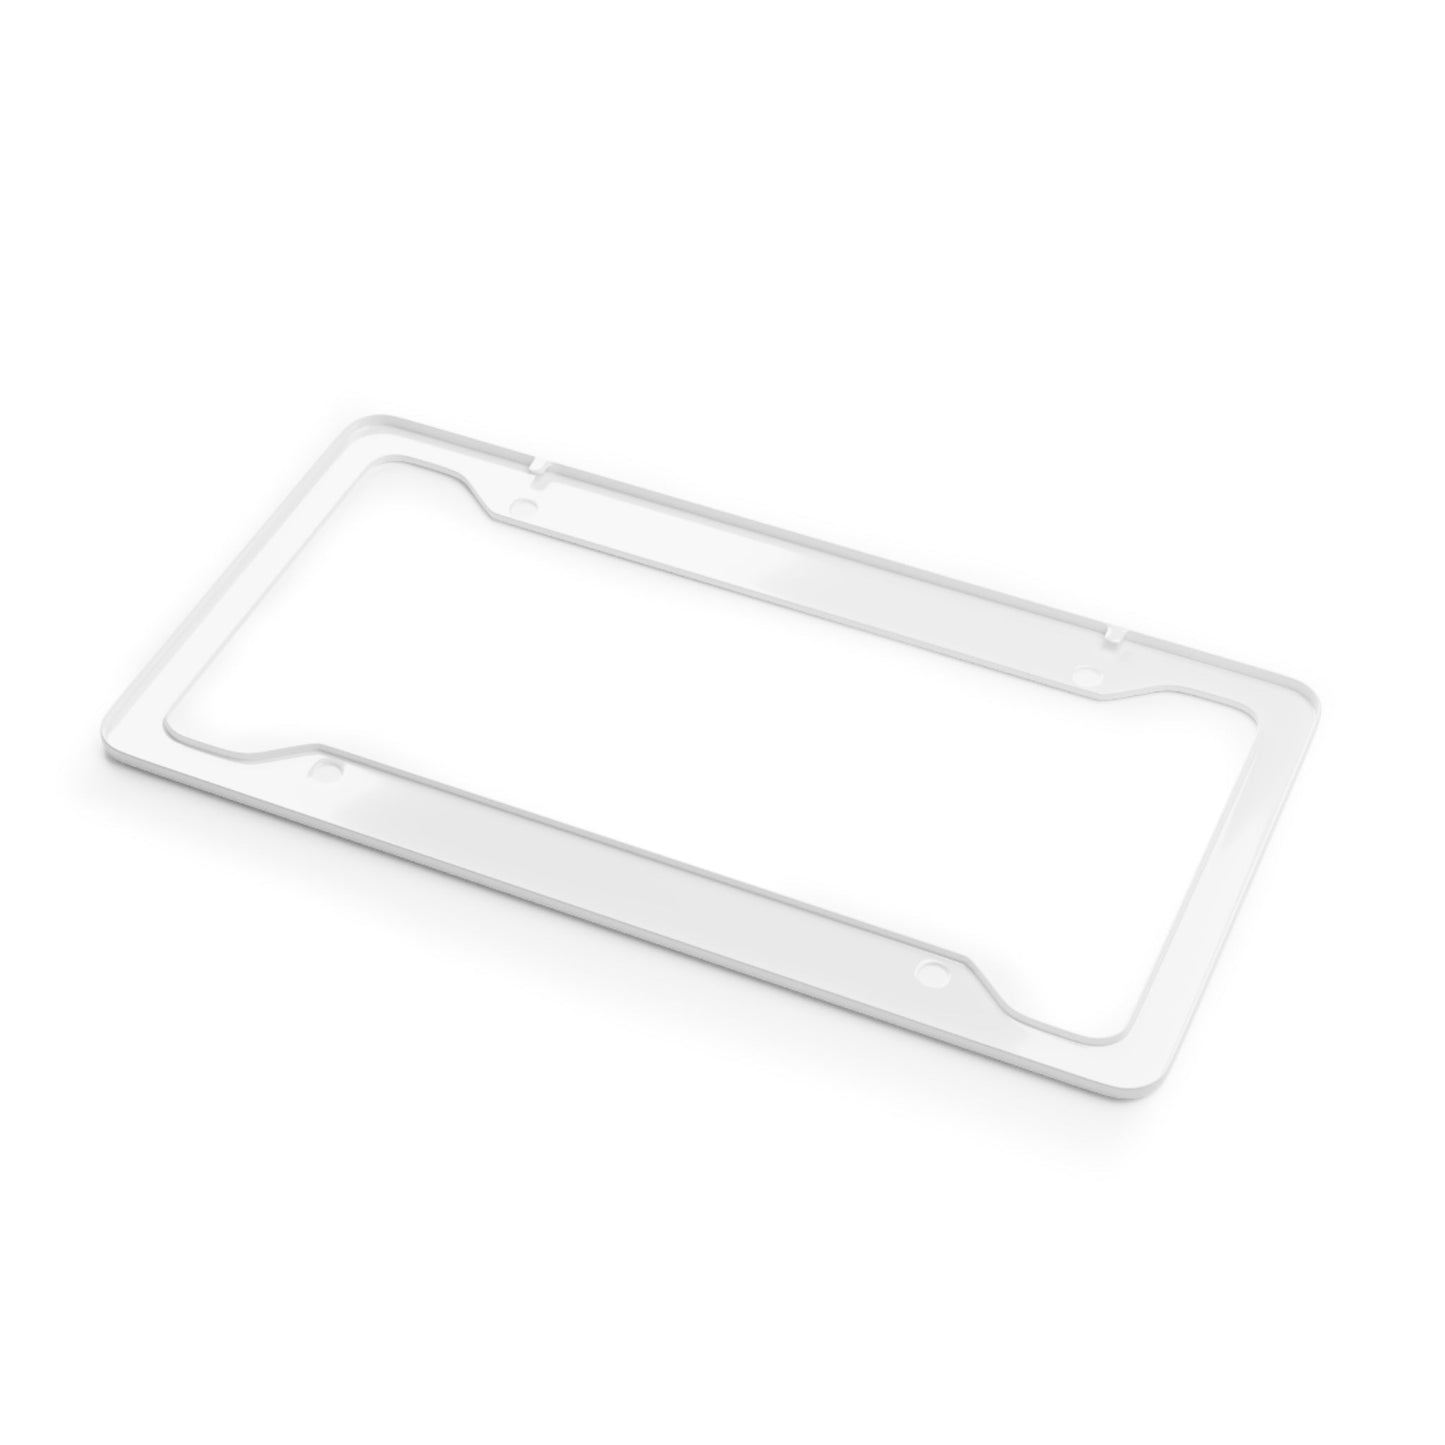 Accessories - Memorial Day License Plate Frame